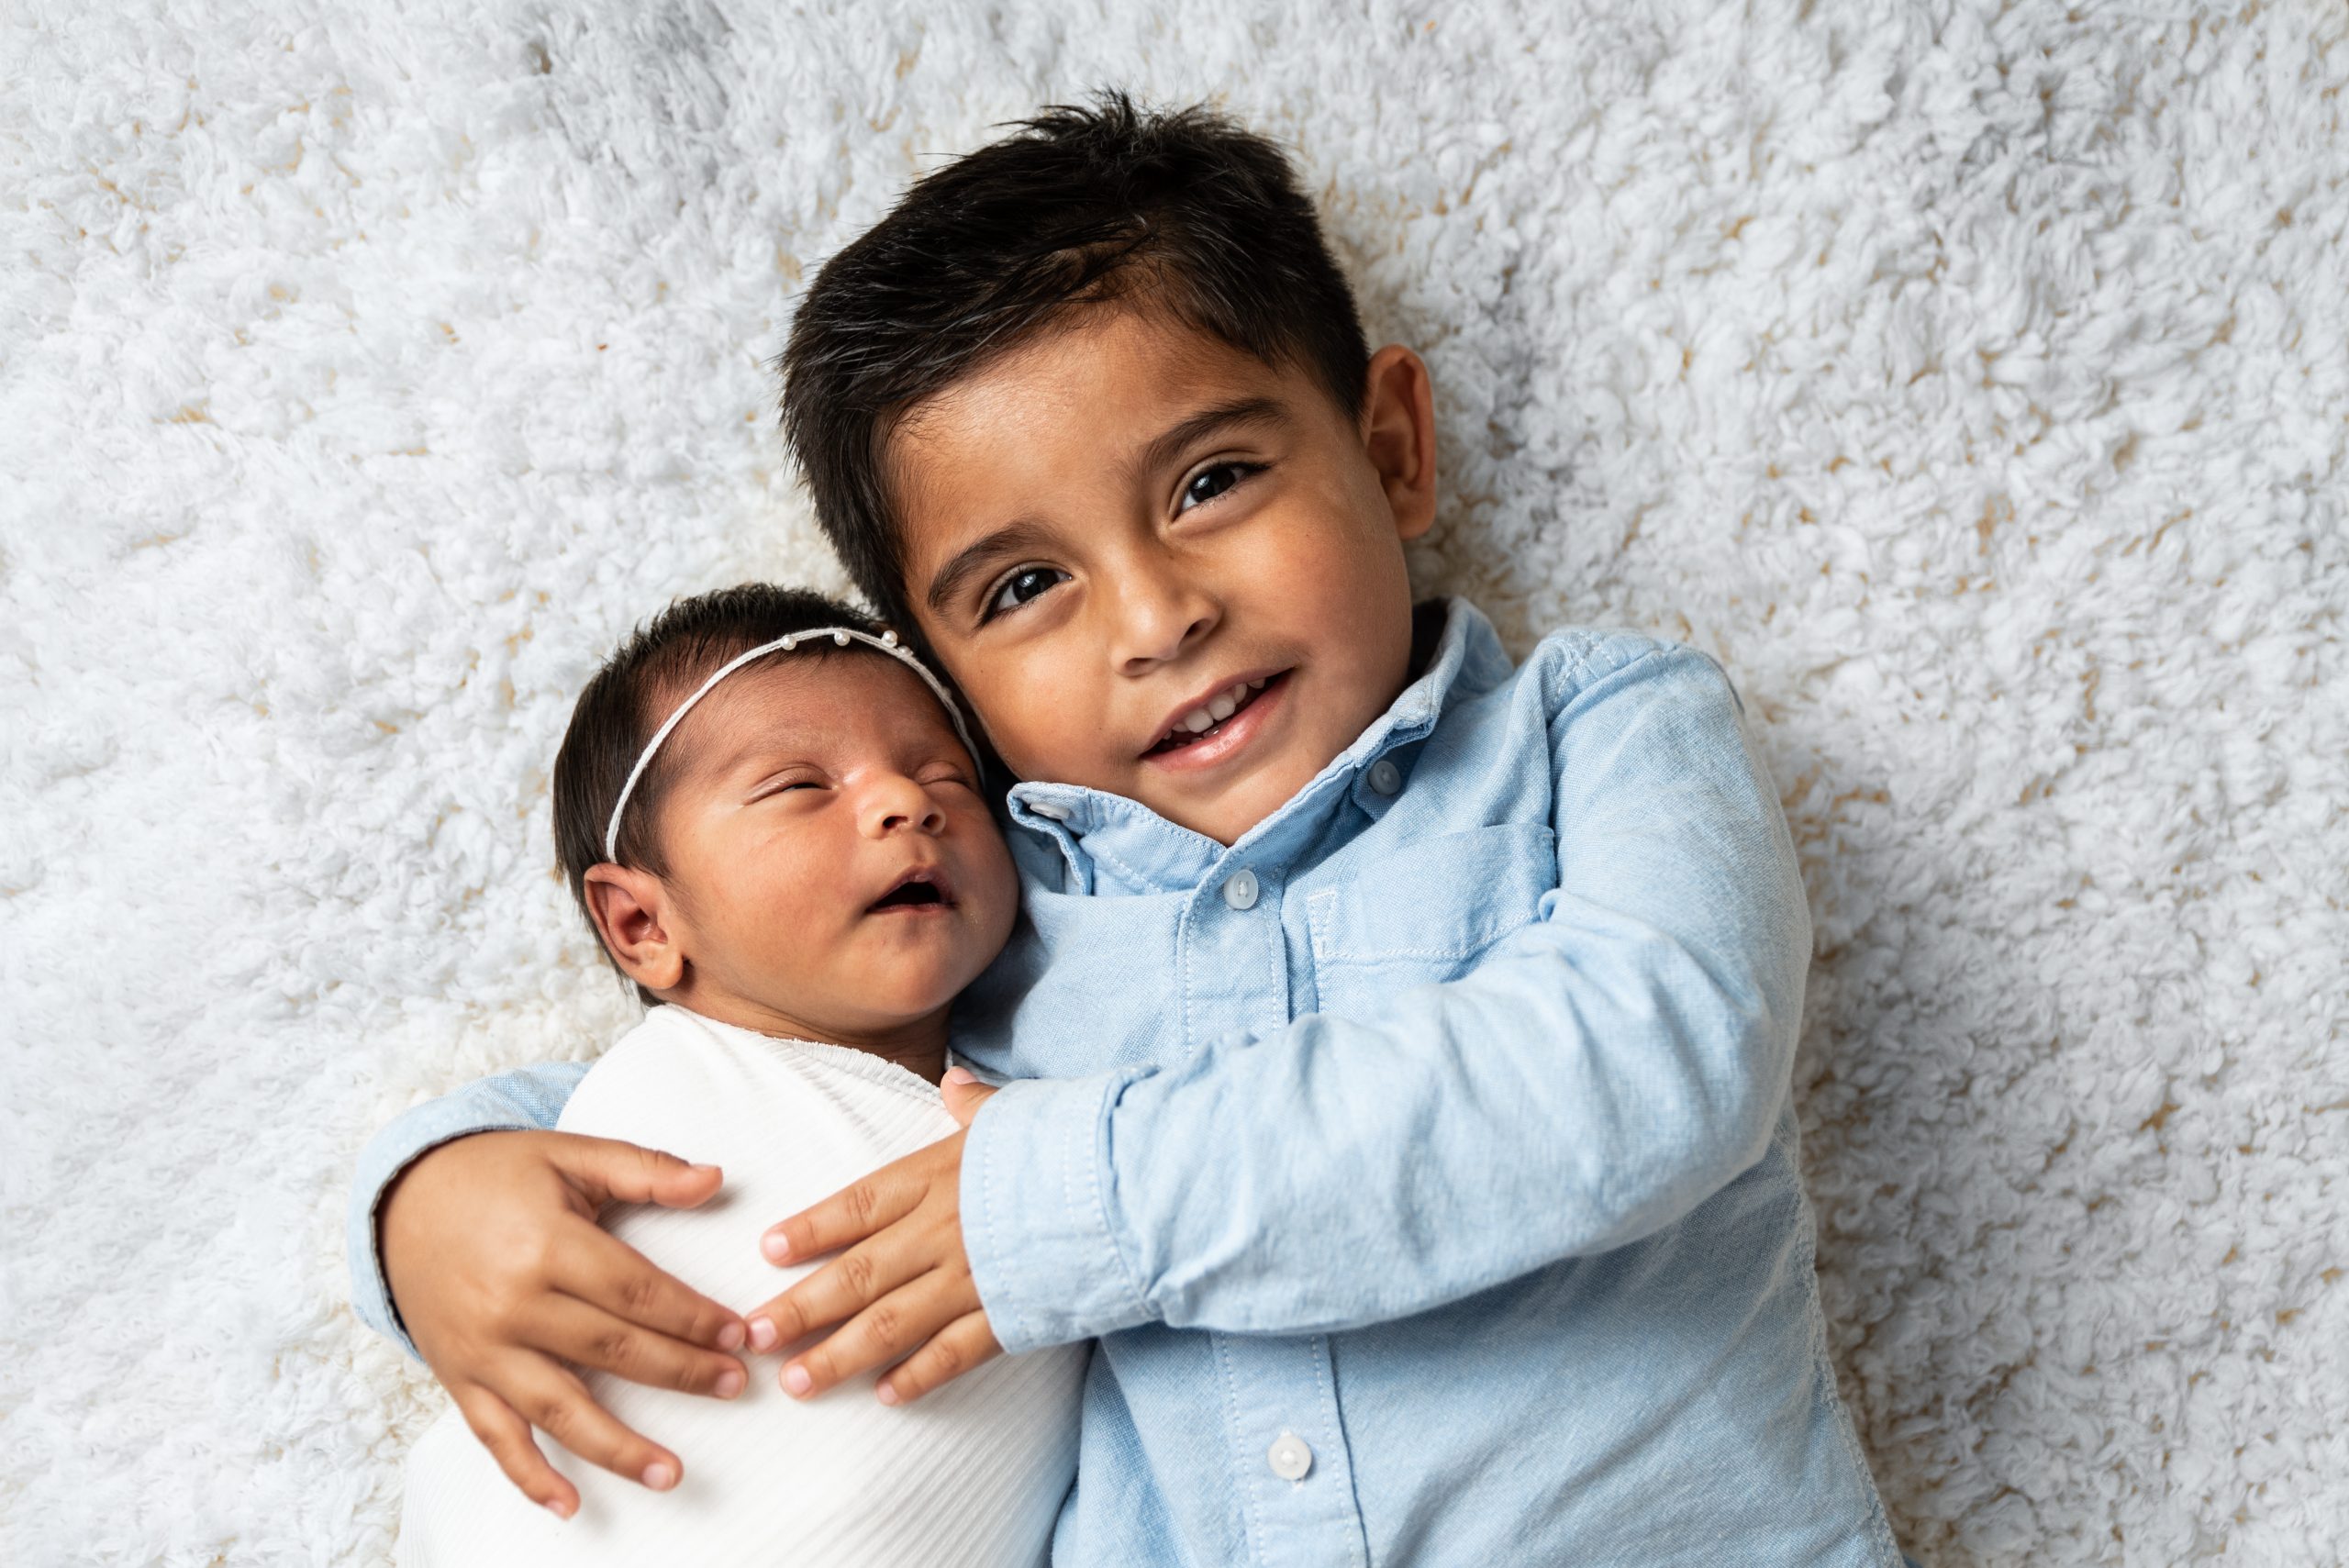 Newborn photos with siblings